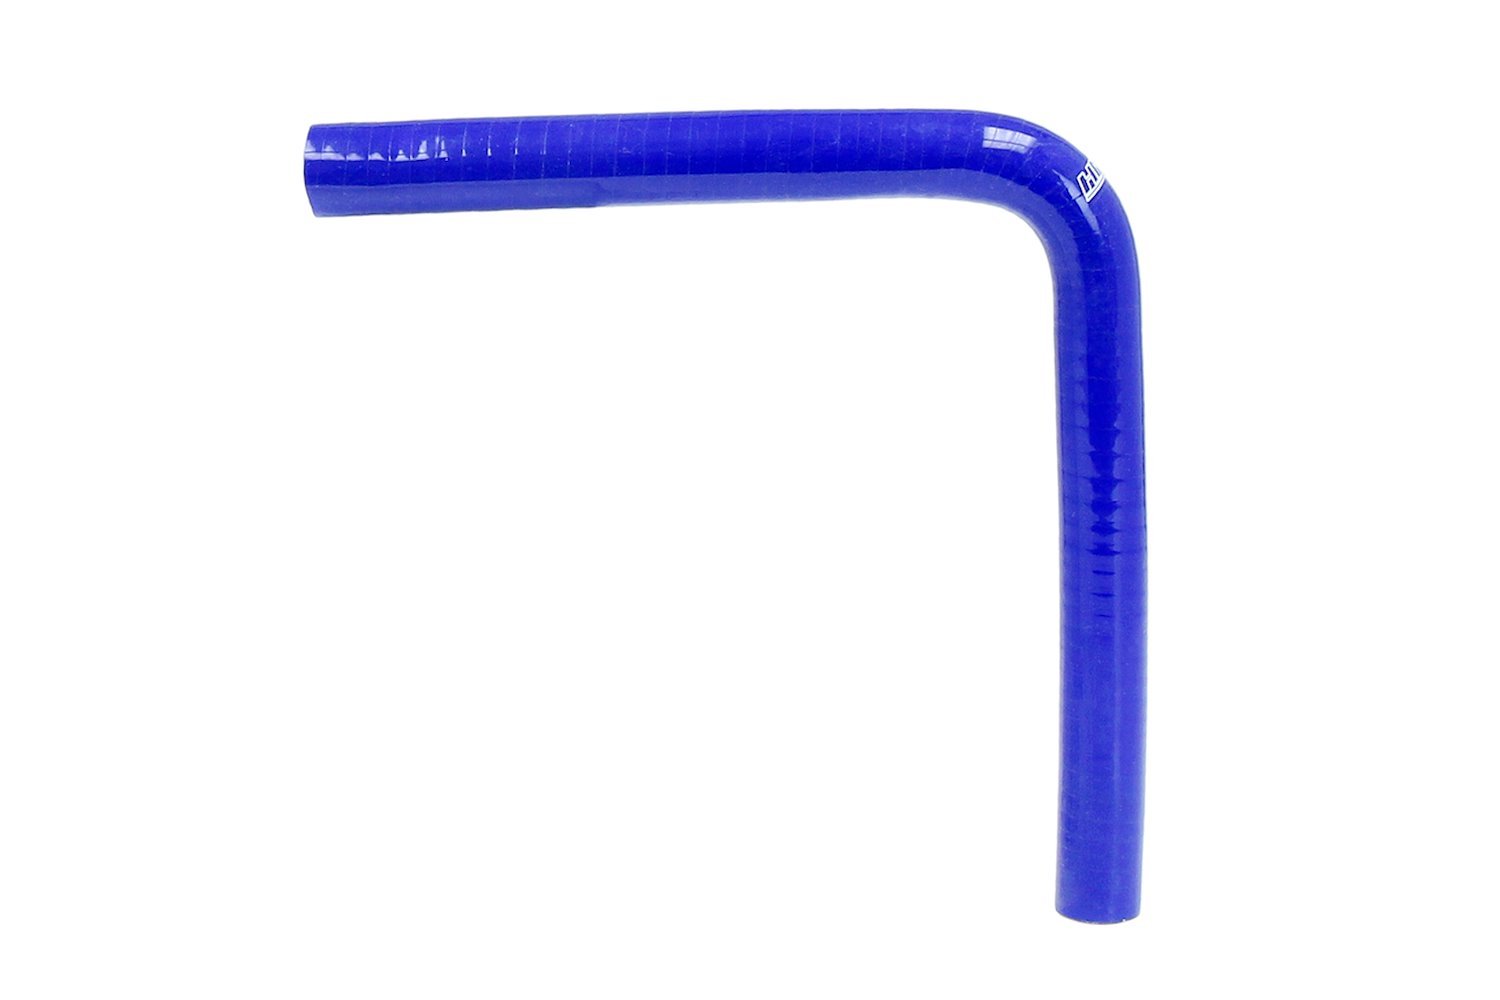 HTSEC90-187-BLUE Silicone 90-Degree Elbow Coupler Hose, High-Temp 4-Ply Reinforced, 1-7/8 in. ID, Blue